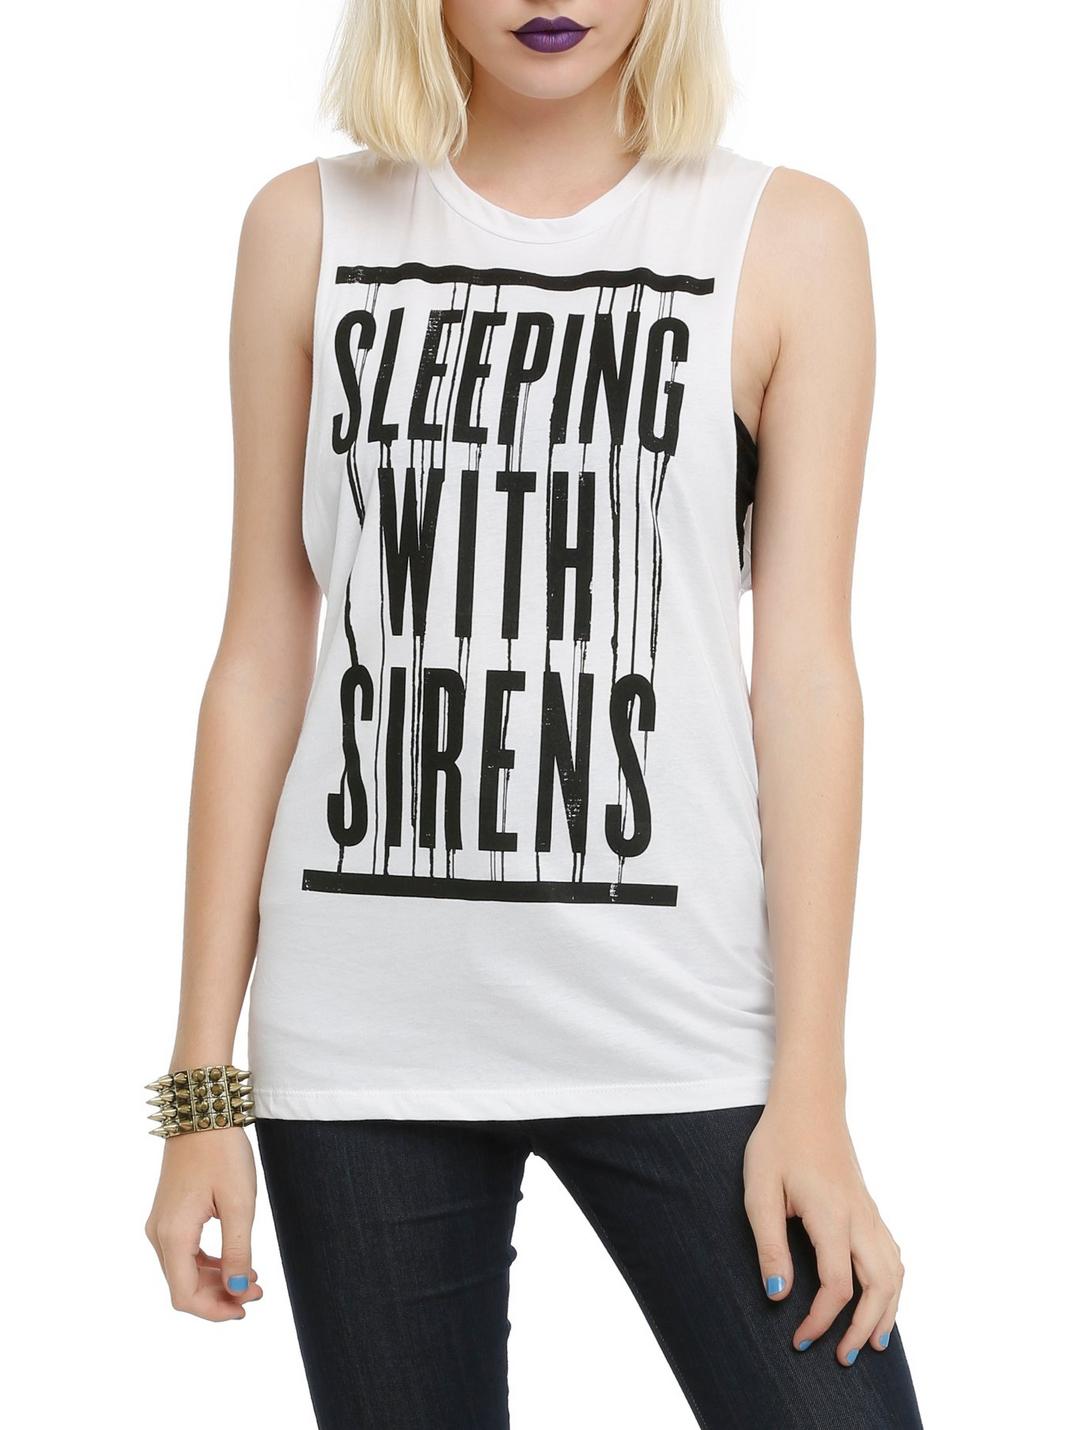 Sleeping With Sirens Stripes Girls Muscle Top, WHITE, hi-res